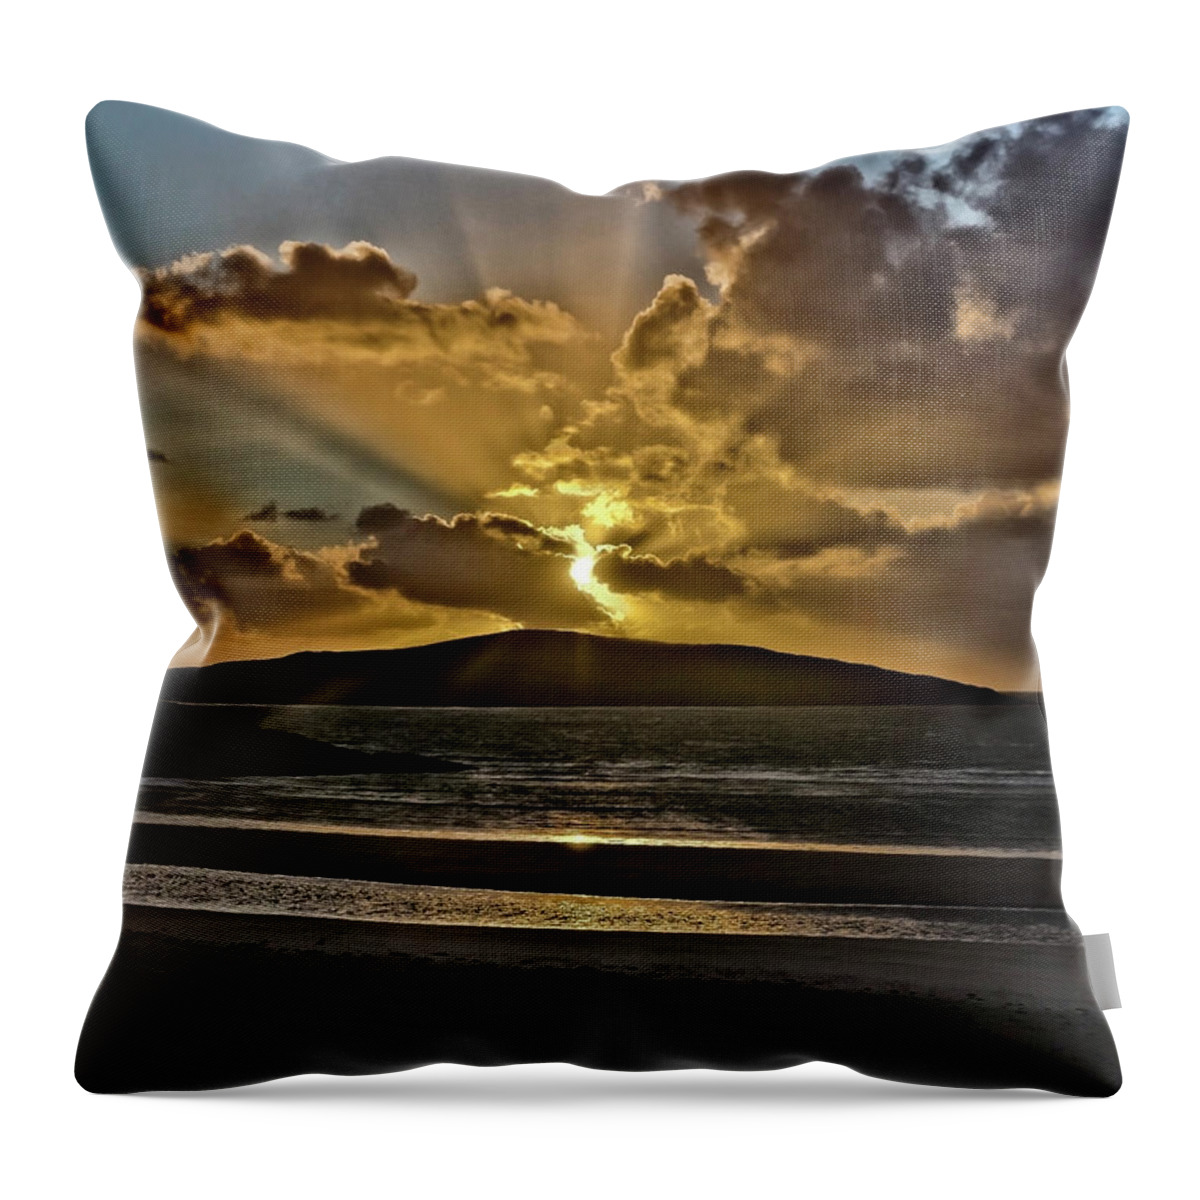 Dramatic Sunset Blue Yellow Round Sun Rays Glen Water Sea Mountain Beautiful Magnificent Stunning Serenity Solitary Nature Powerful Clouds Sky Shining Scotland Harris Highlands Mountains Setting Landscape Panorama Panoramic Breathtaking Spectacular Exciting Mindfulness Relaxing Artistic Unwinding Stylish Exceptional Singular Memorable Phenomenal Eccentric Awesome Electrifying Stimulating Intoxicating Sensational Thrilling Splendid Atmospheric Aesthetic Charming Outer Hebrides Fantastic Magical Throw Pillow featuring the photograph Dramatic sunset at sea and mountains by Tatiana Bogracheva